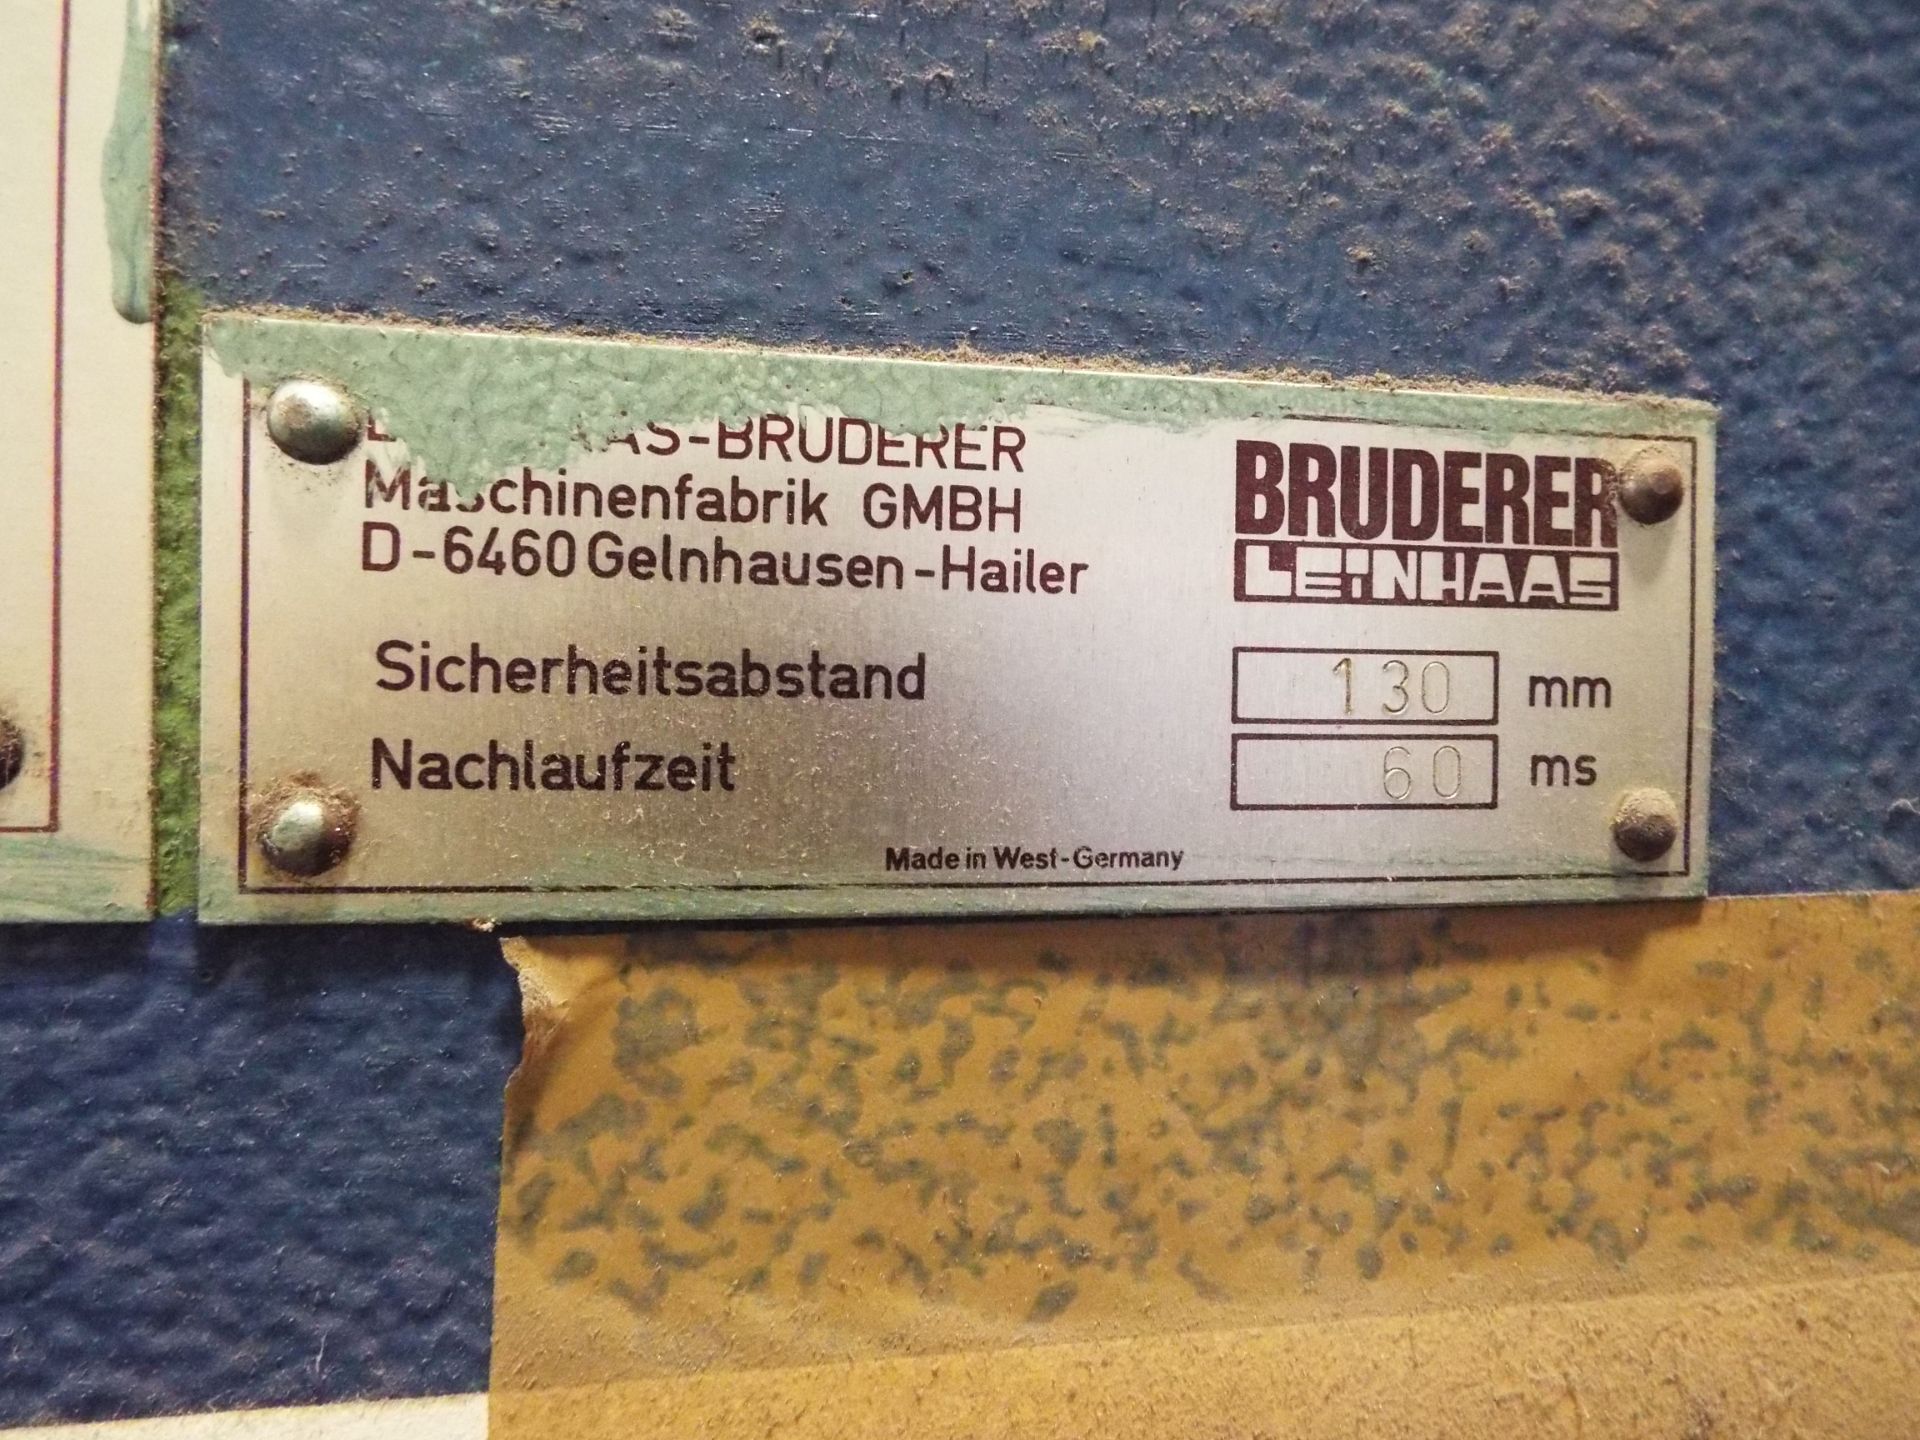 Bruderer Leinhaas DWP-R11-100-NS Single Column Differential High Speed Hydraulic Press - Image 3 of 10